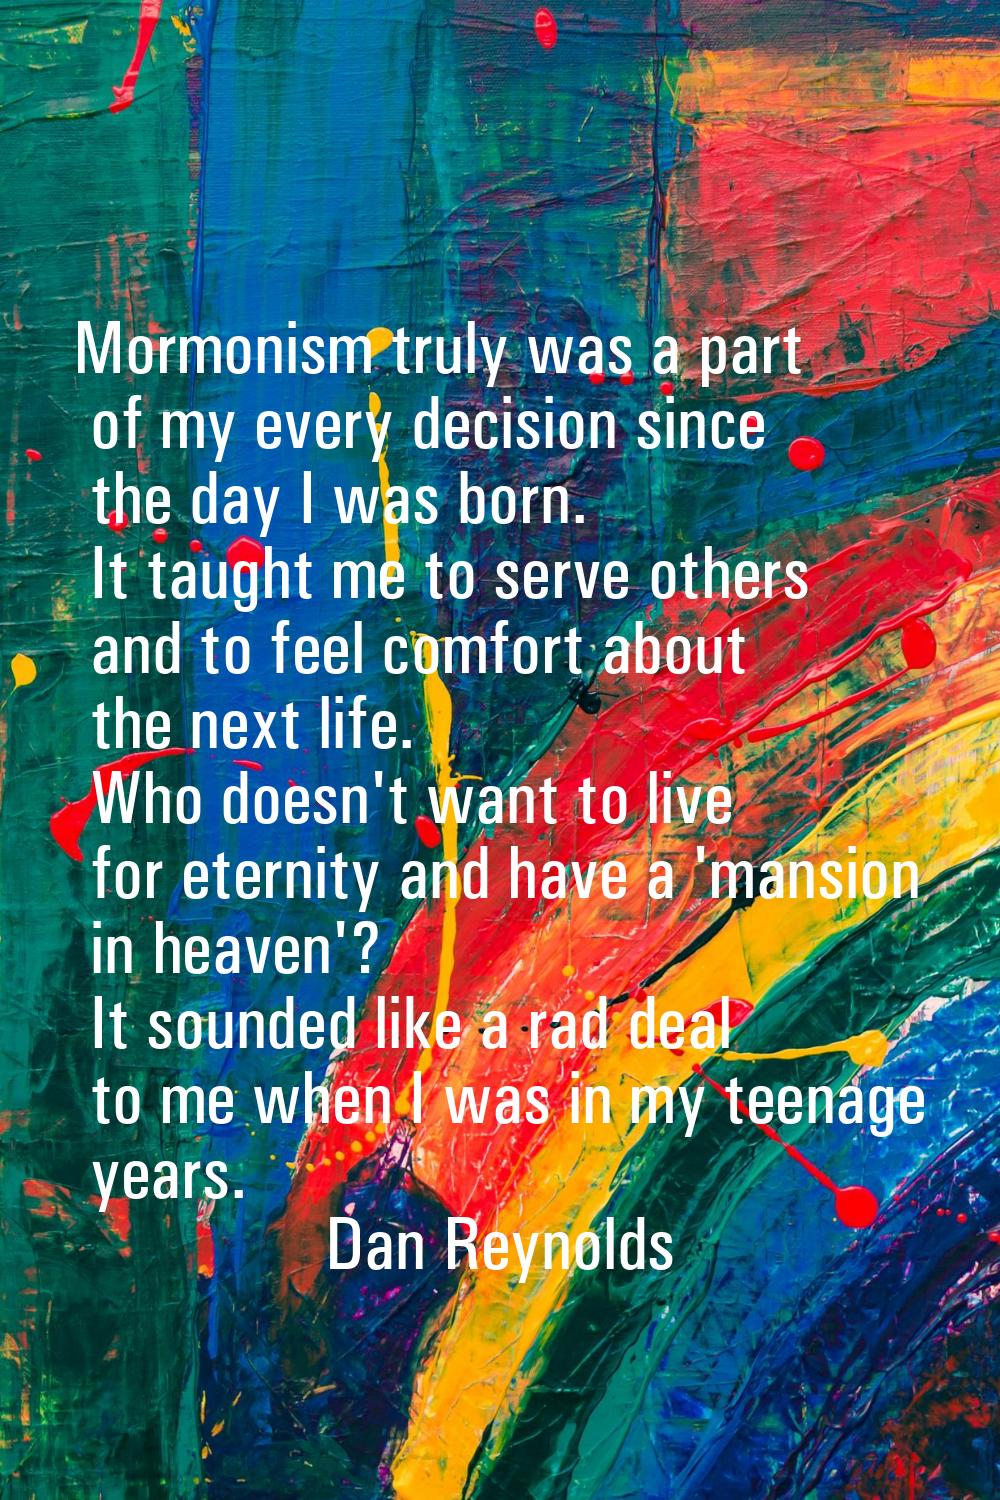 Mormonism truly was a part of my every decision since the day I was born. It taught me to serve oth